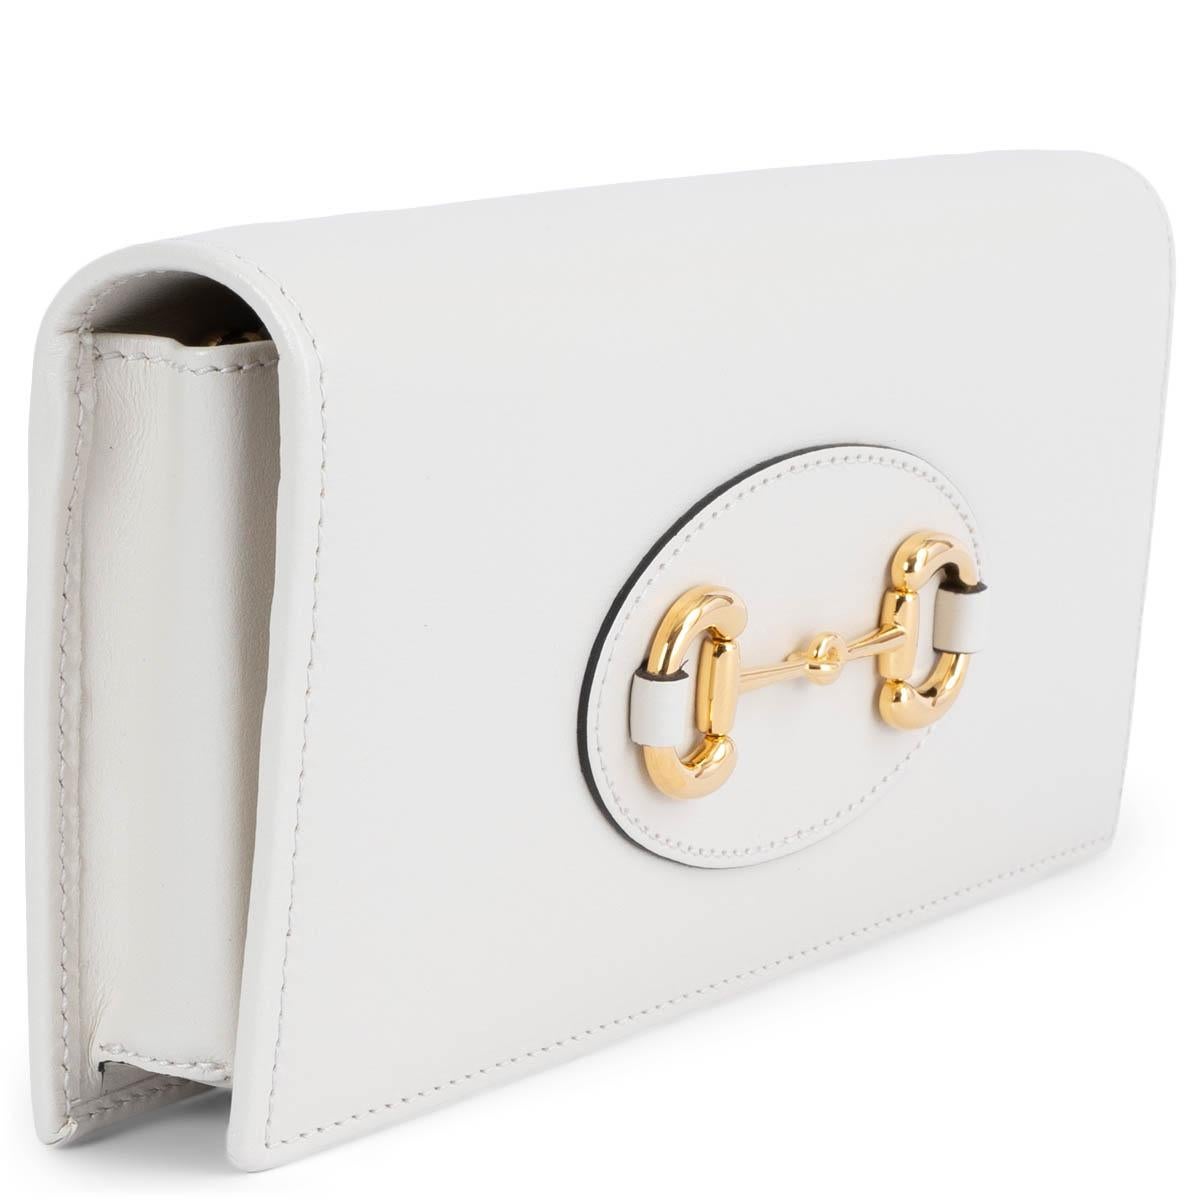 100% authentic Gucci Horsebit 1955 wallet in chain in ivory smooth calfskin featuring gold-tone hardware. Opens with a push-button and is lined in leather and nylon with one zipper pocket against the back. Chain-link shoulder-strap can get removed